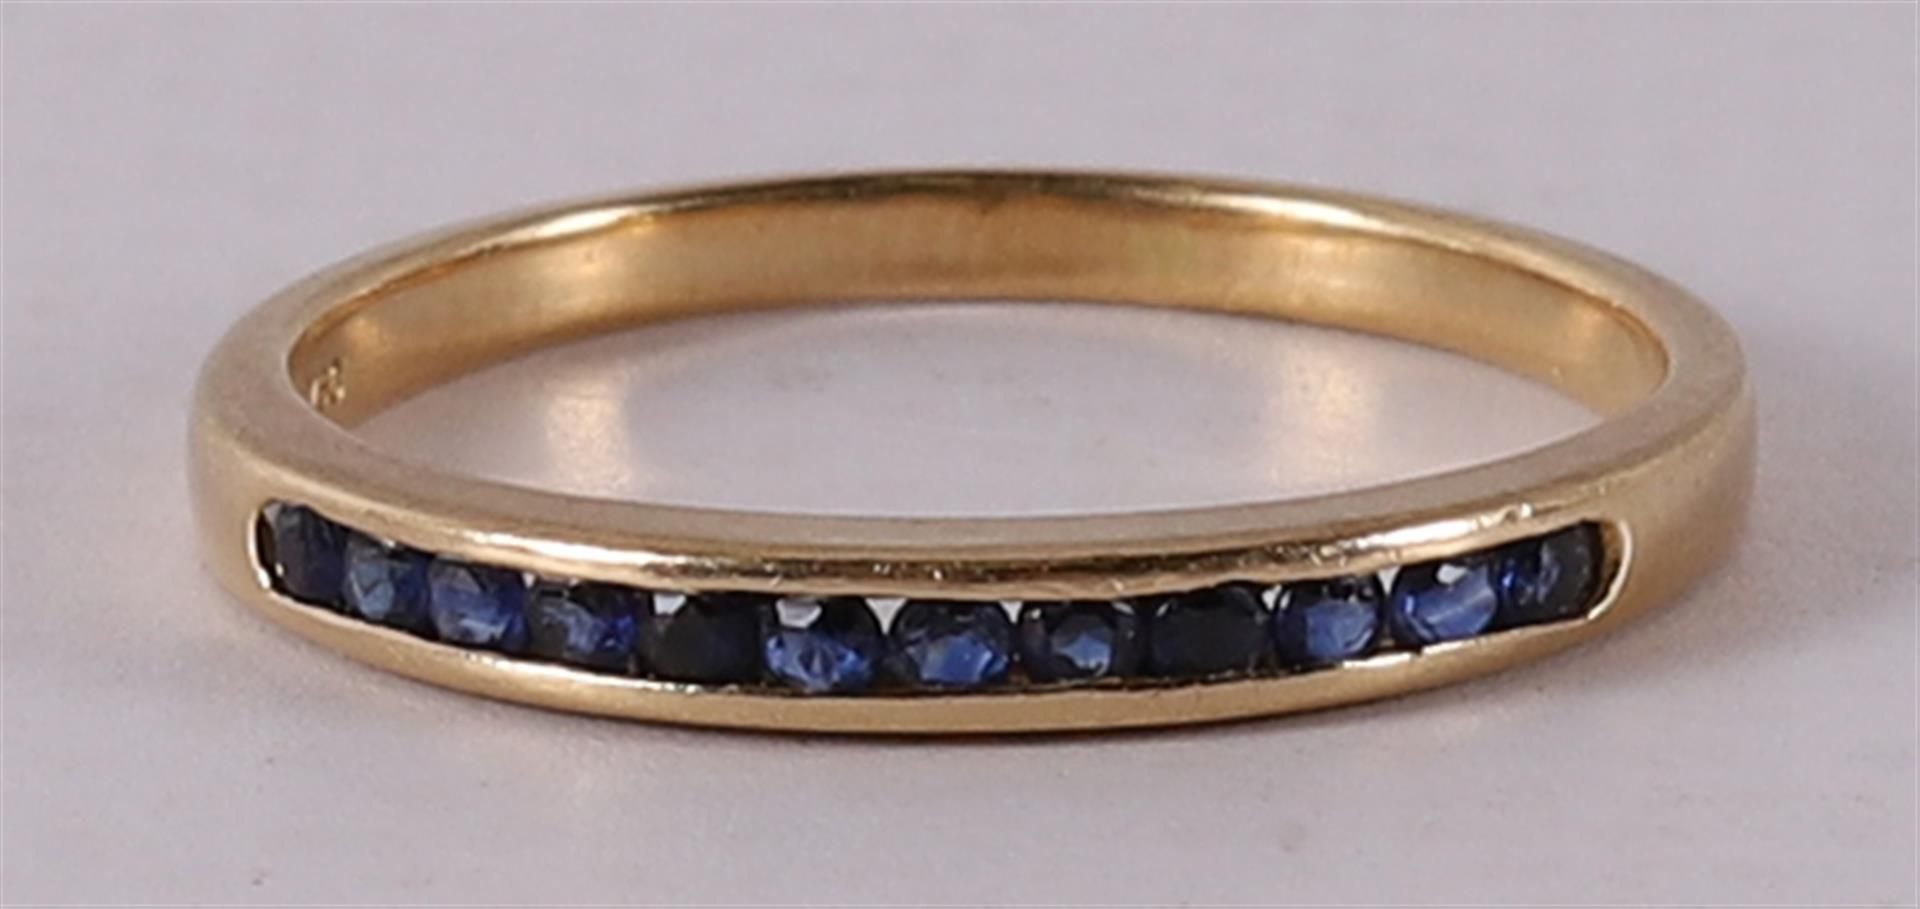 An 18 kt gold row ring with 12 facet cut blue sapphires